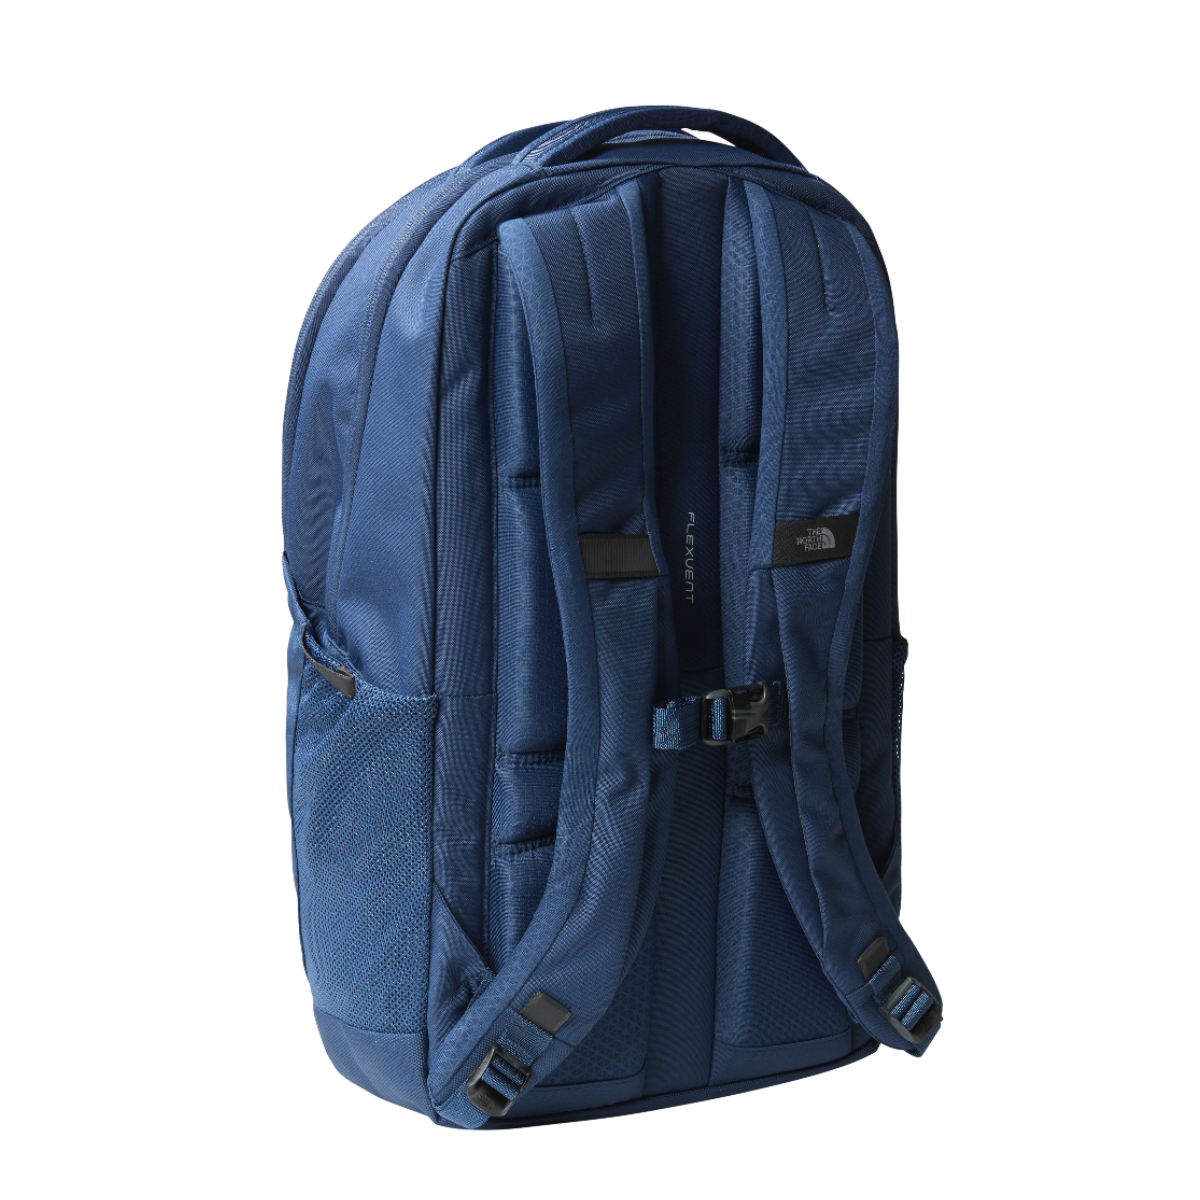 The North Face Vault Backpack | Shady Blue